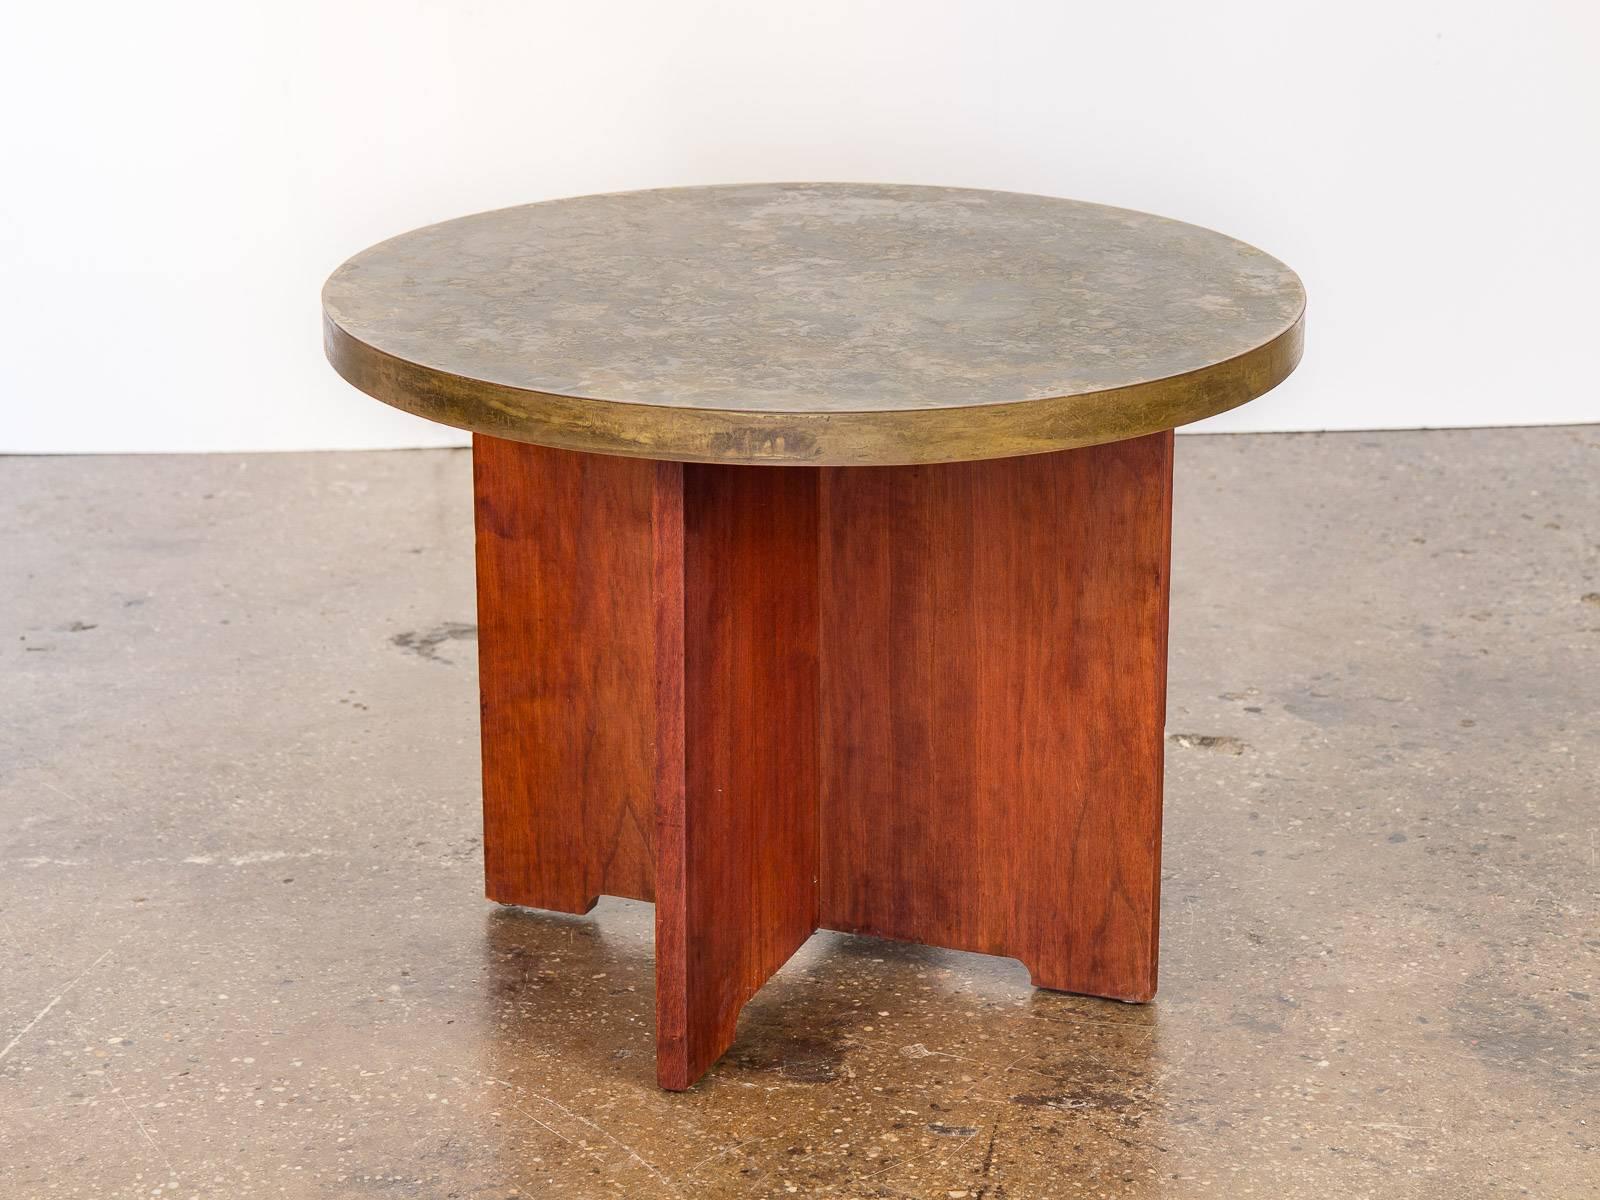 1960s acid-etched round side table in the style of Philip and Kelvin LaVerne. The acid-etched texture creates a lovely mottled finished surface which sits on a sturdy, cross lap-joint wooden base that is quite low to the ground. Table-top measures